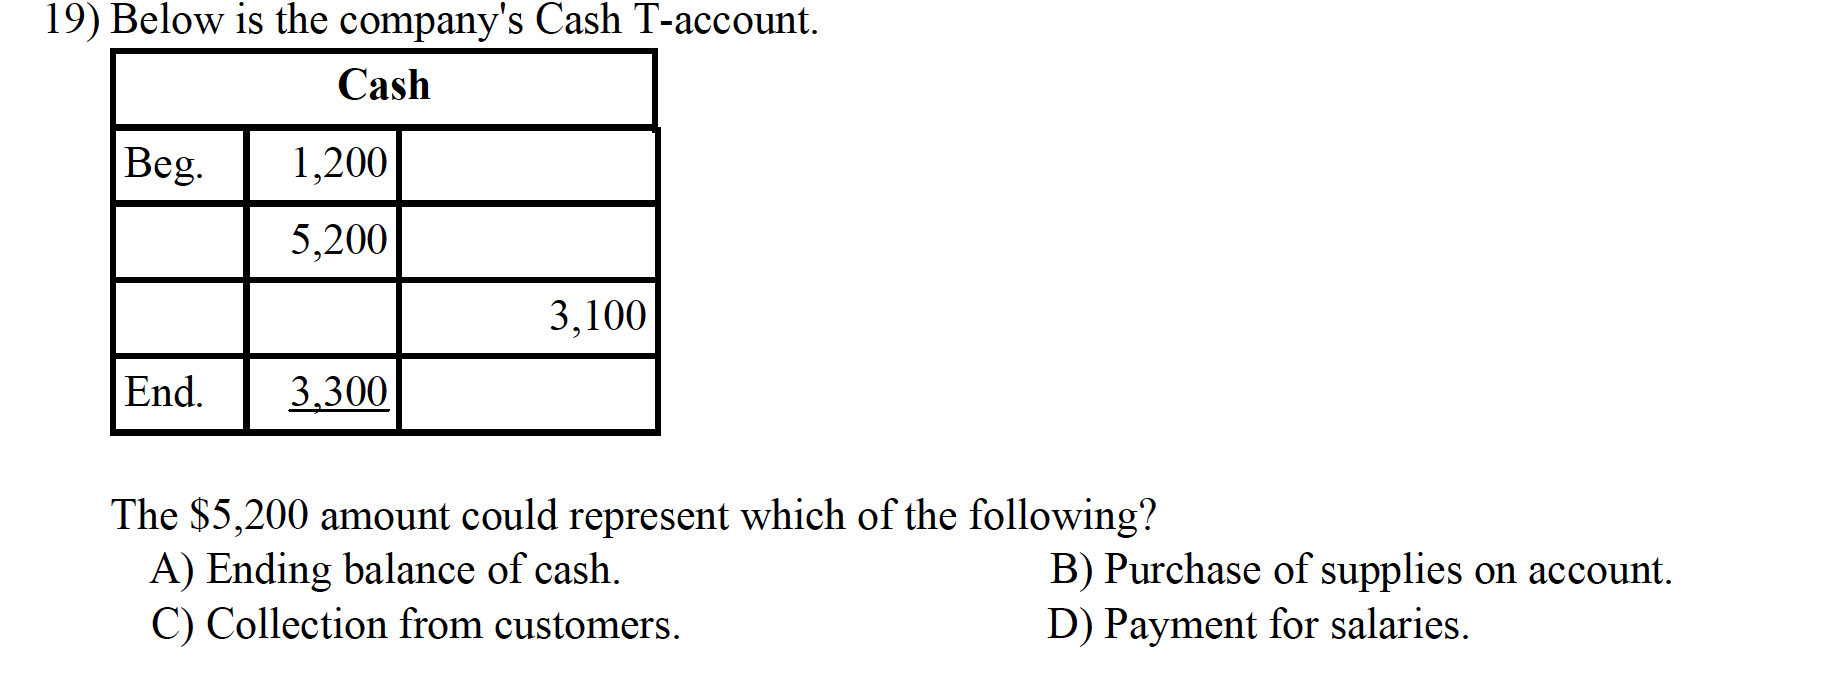 19) Below is the company's Cash T-account.
Cash
Beg.
1,200
5,200
3,100
End.
3,300
The $5,200 amount could represent which of the following?
A) Ending balance of cash.
C) Collection from customers.
B) Purchase of supplies on account.
D) Payment for salaries.
